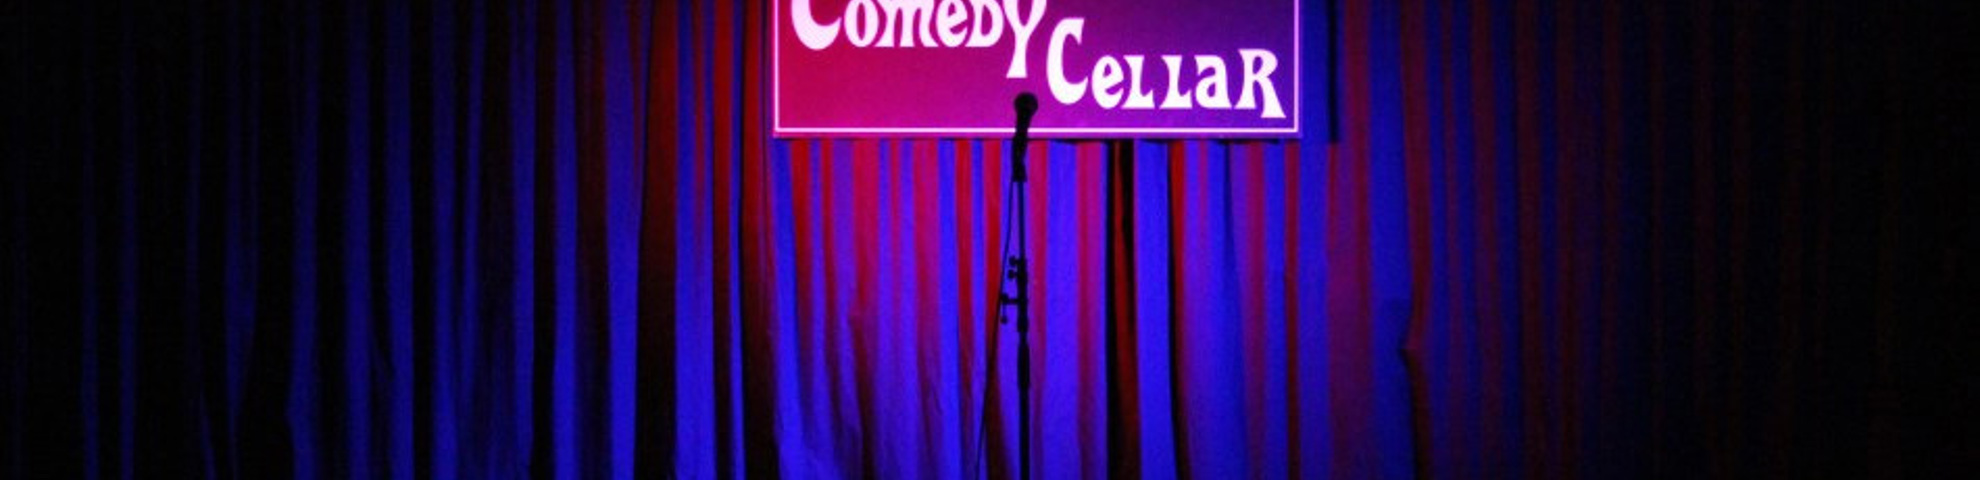 A curtain with a neon sign saying 'Comedy Cellar.'